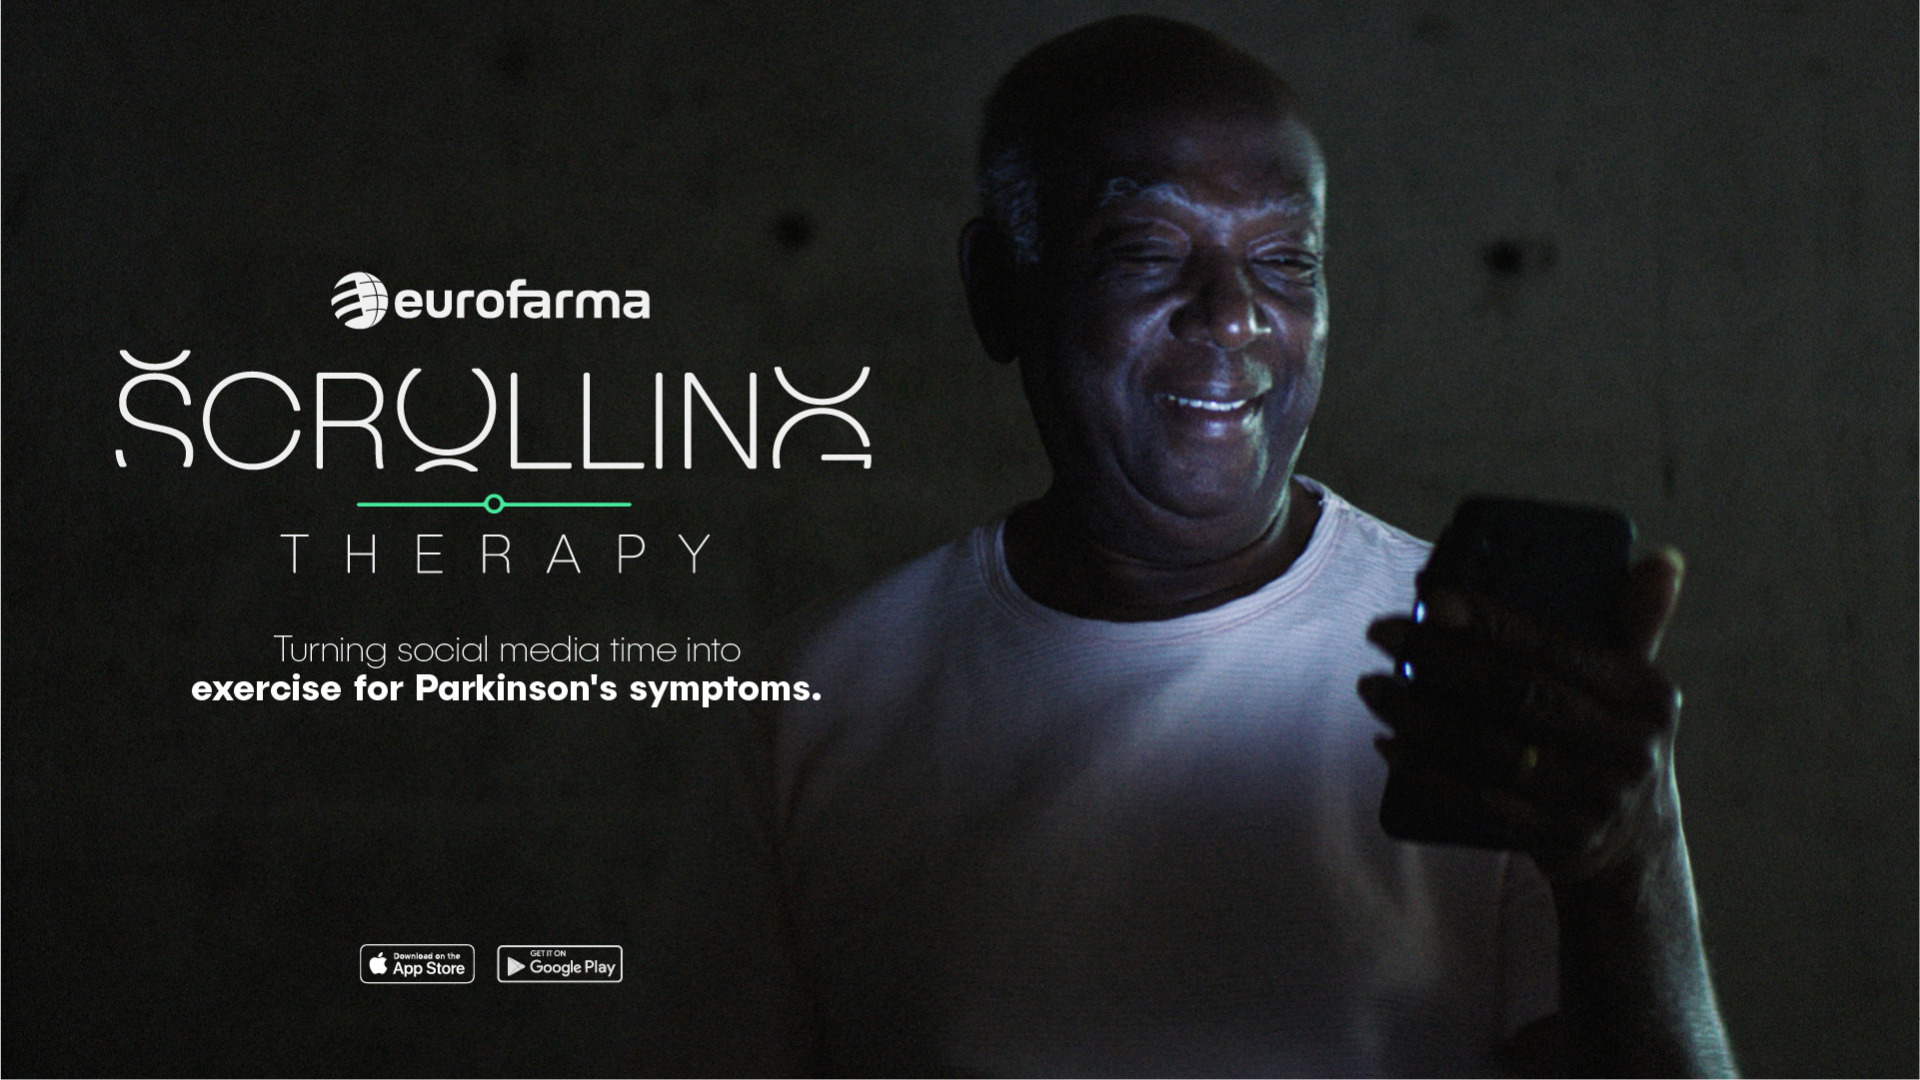 Euroforma's Scrolling Therapy for Parkinson's Patients